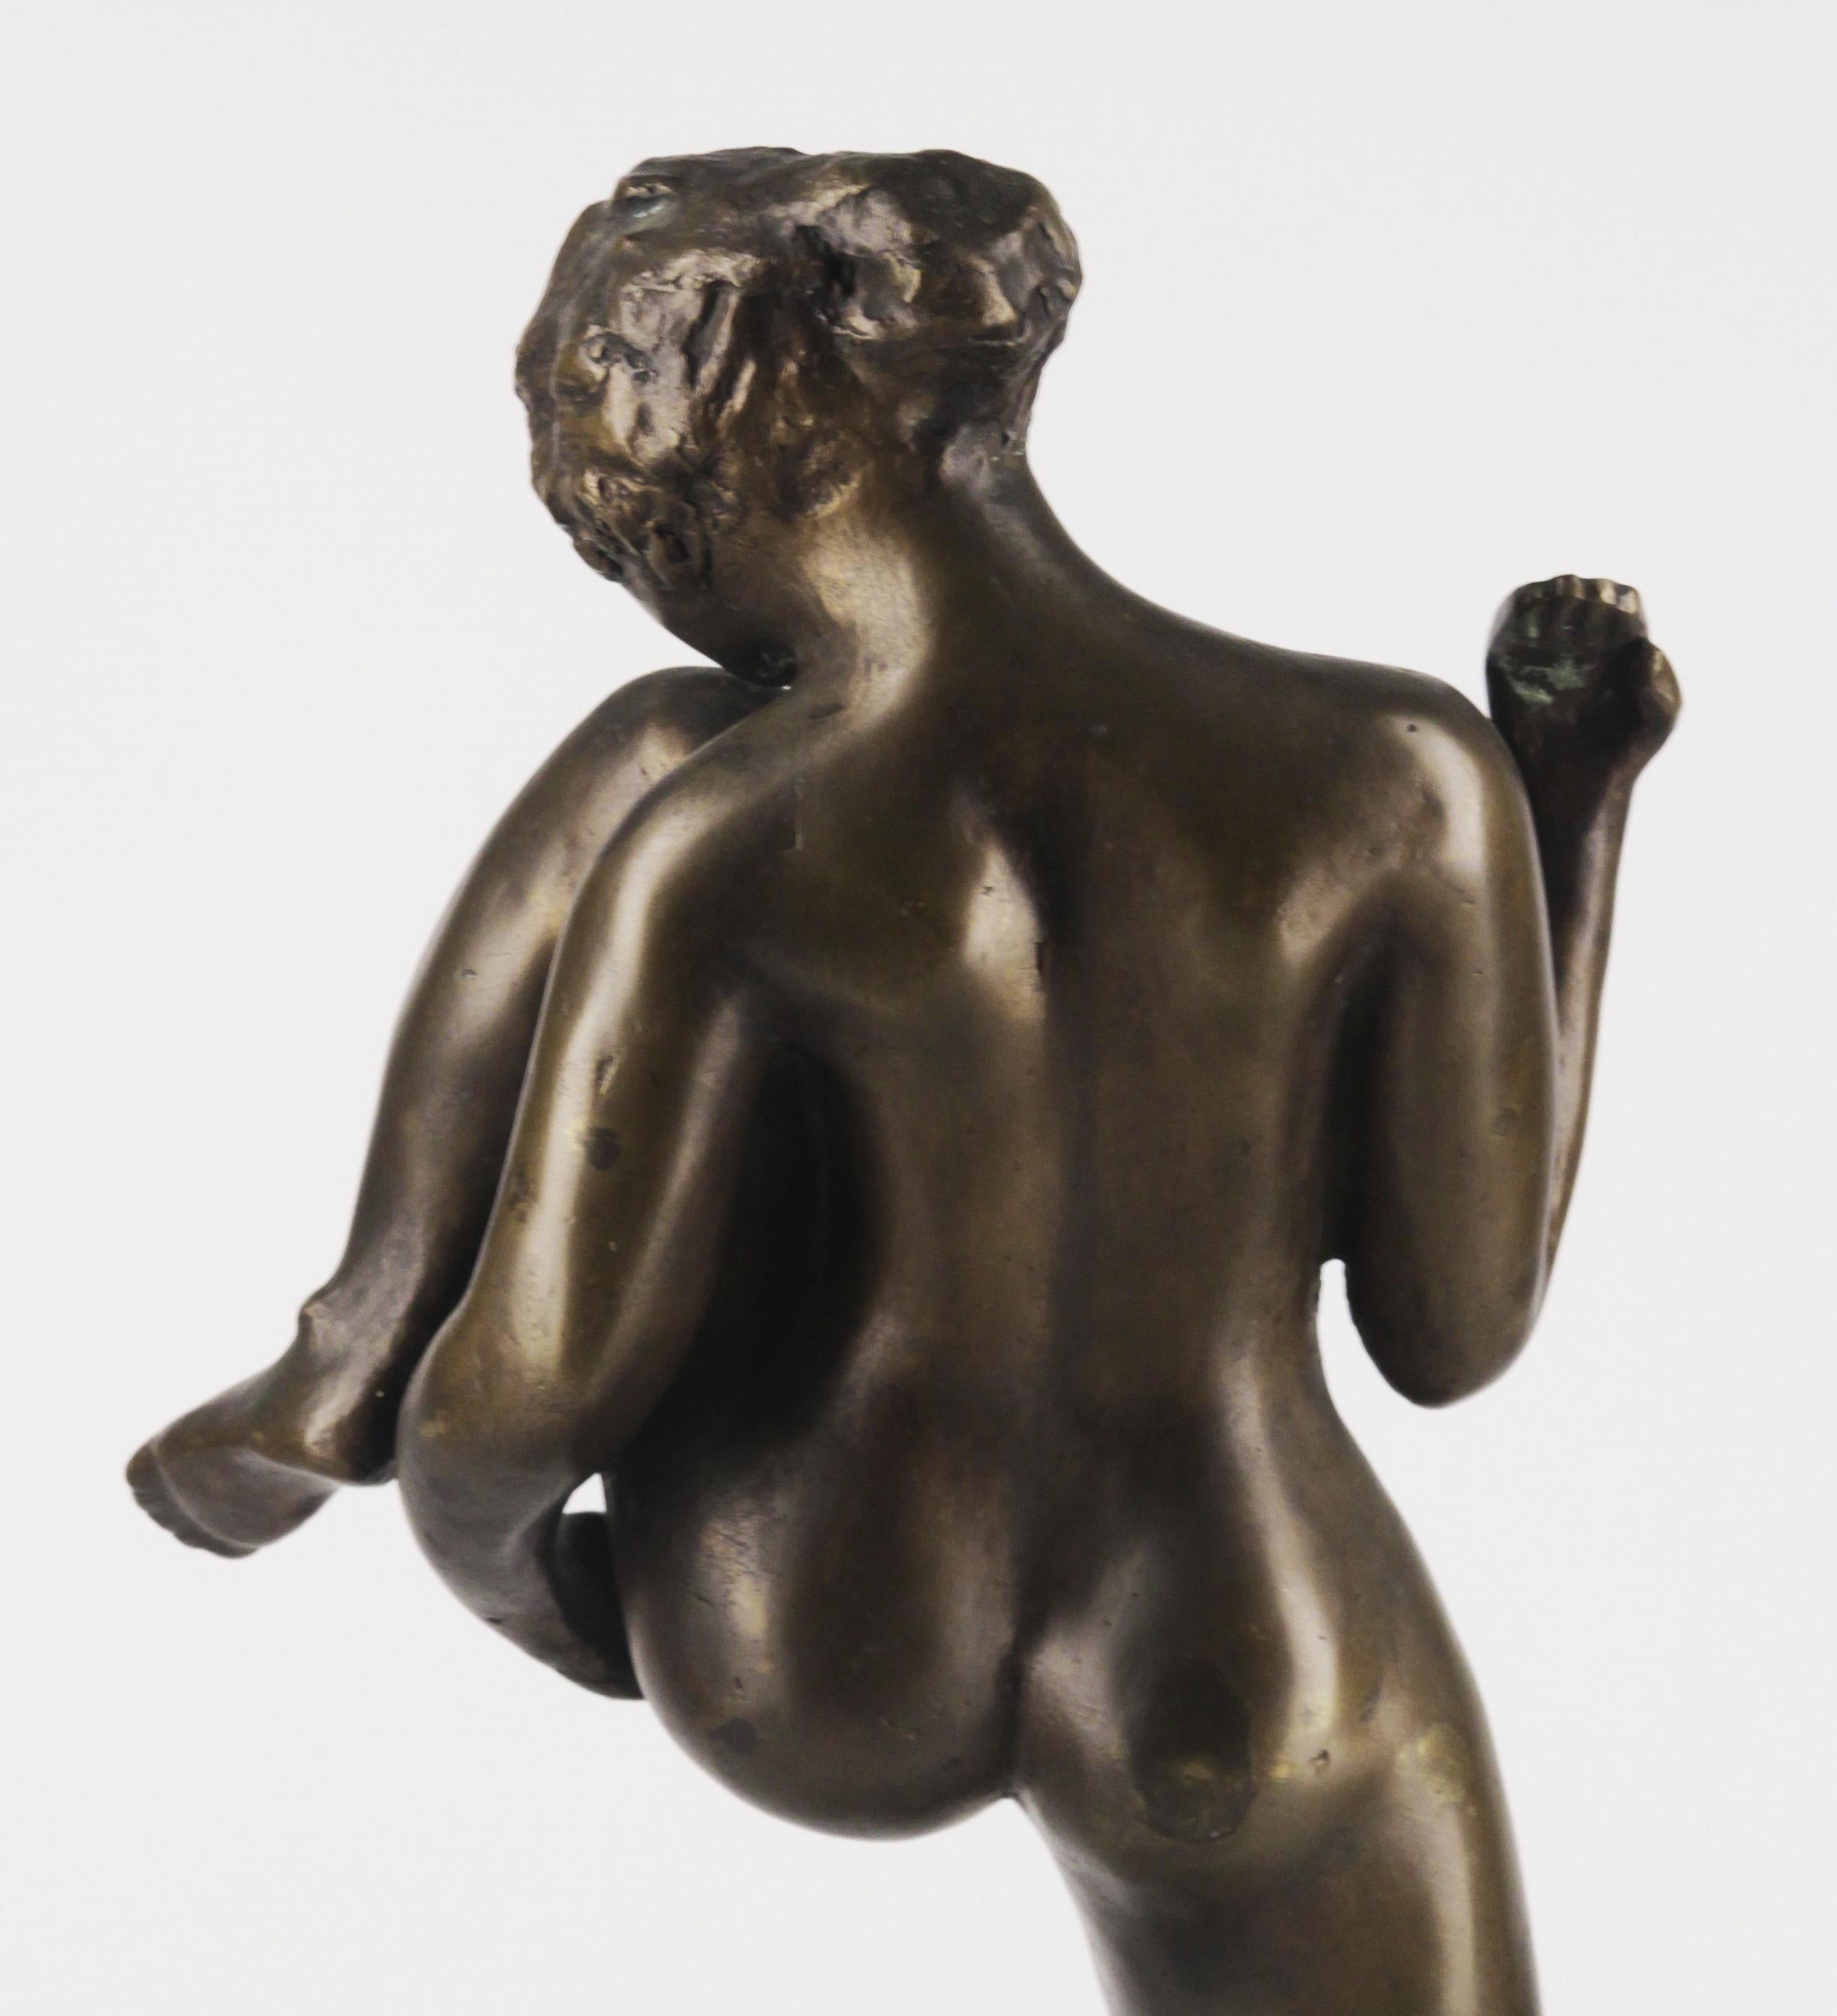 20th C. Bronze Sculpture of a Nude Woman by Argentine Sculptor J. Mariano Pagés In Good Condition For Sale In North Miami, FL